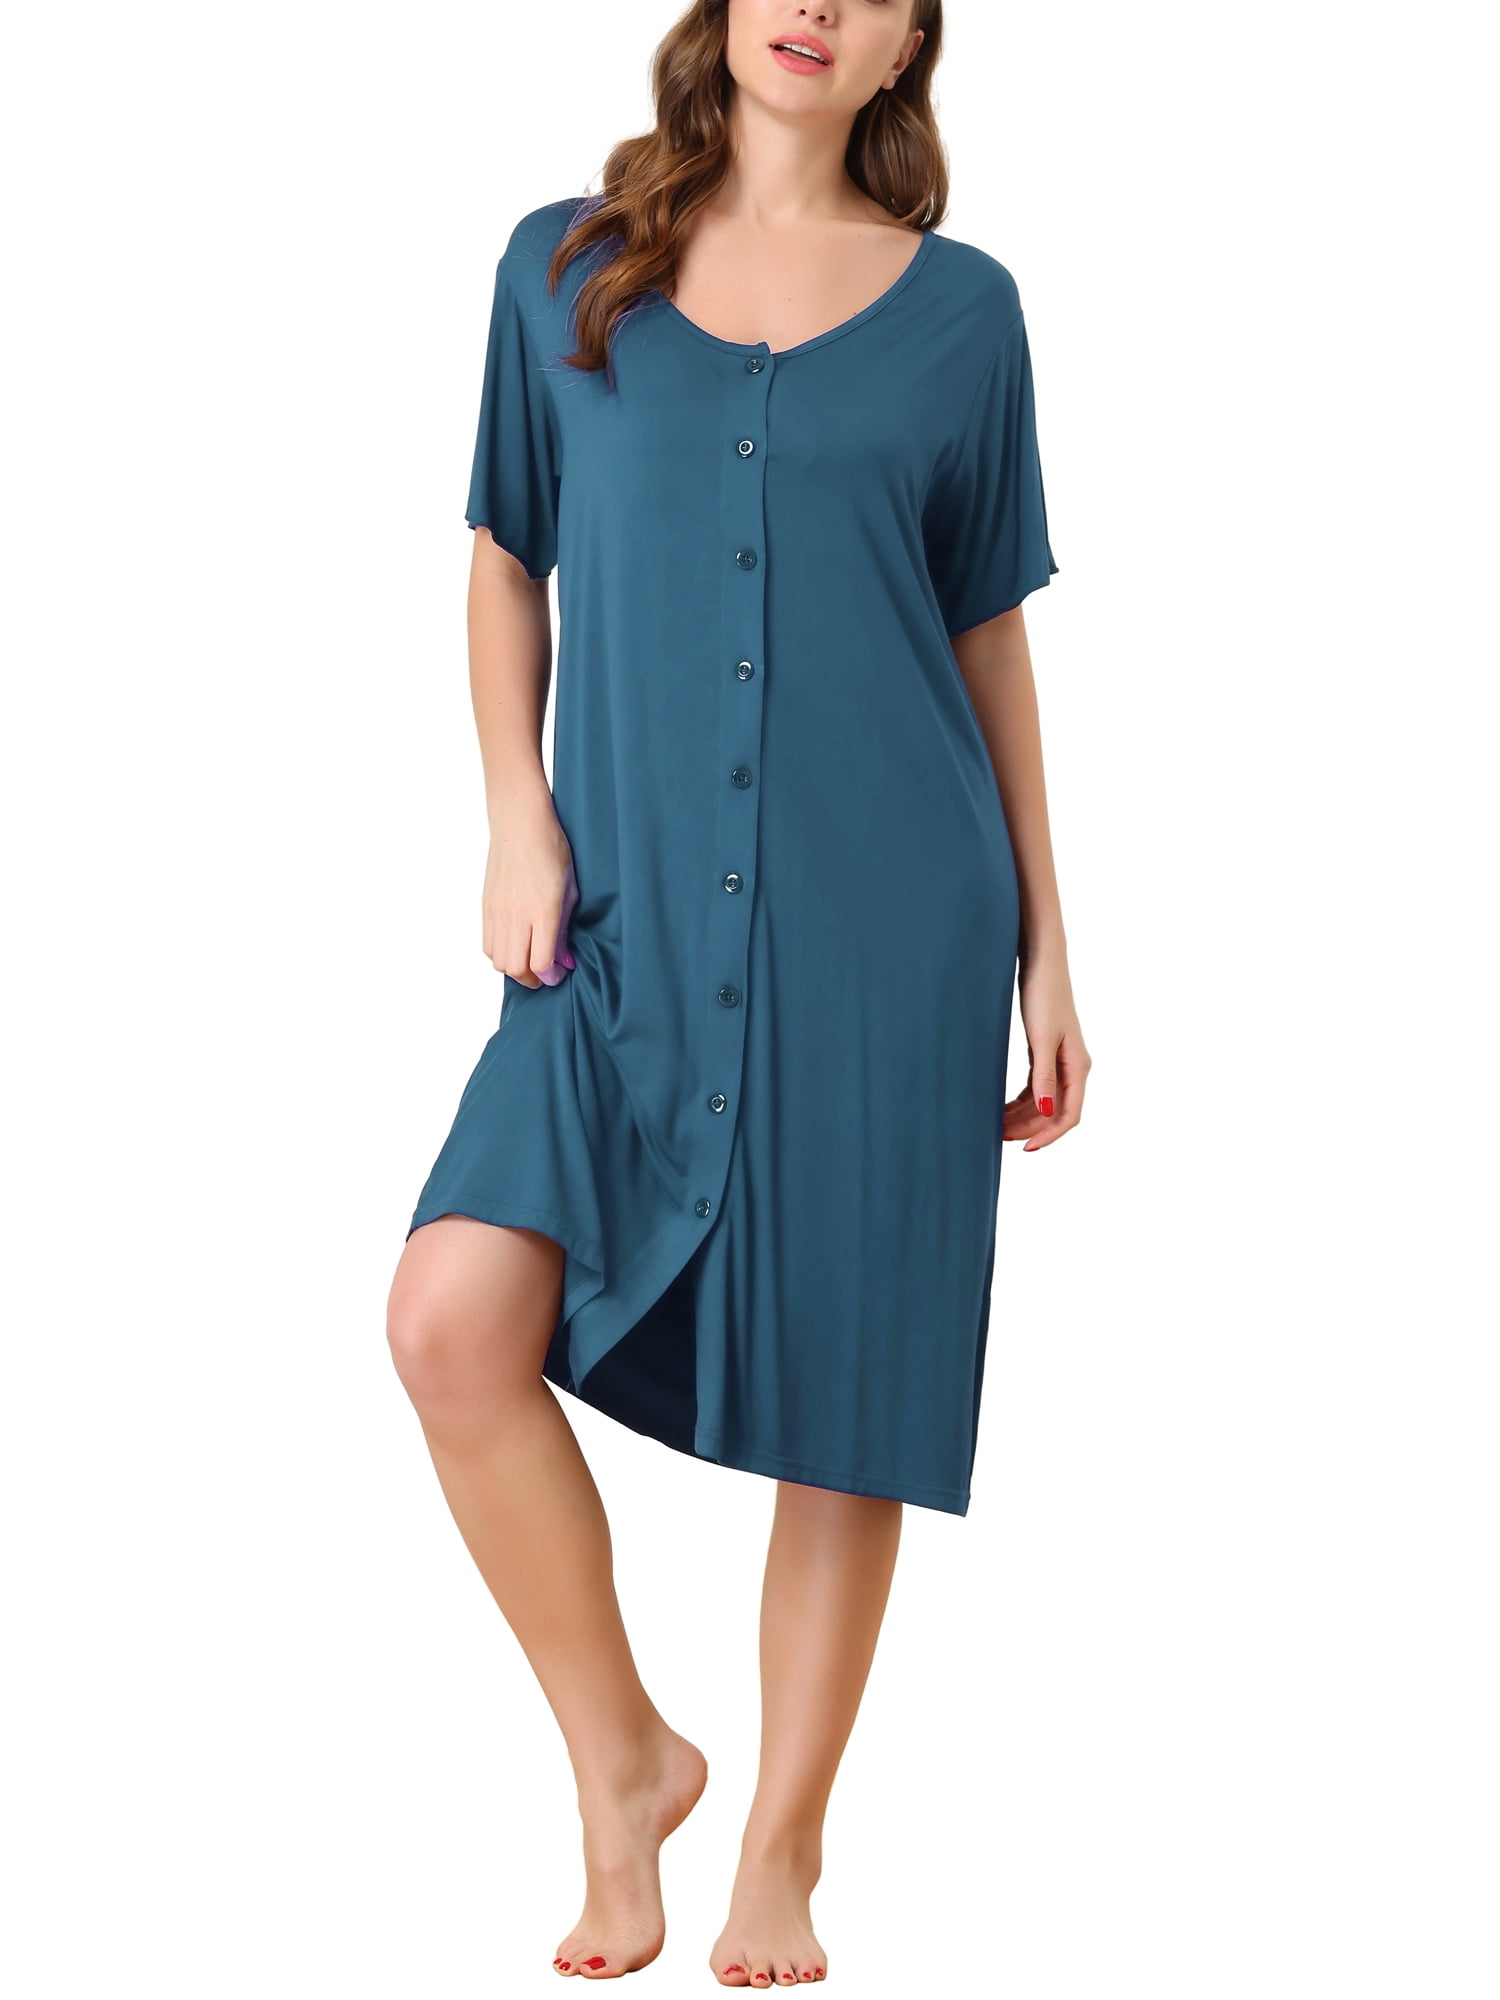 FEREMO 100% Cotton Nightgowns for Women Plus Size Neckline Embroidery Comfy  Sleepwear